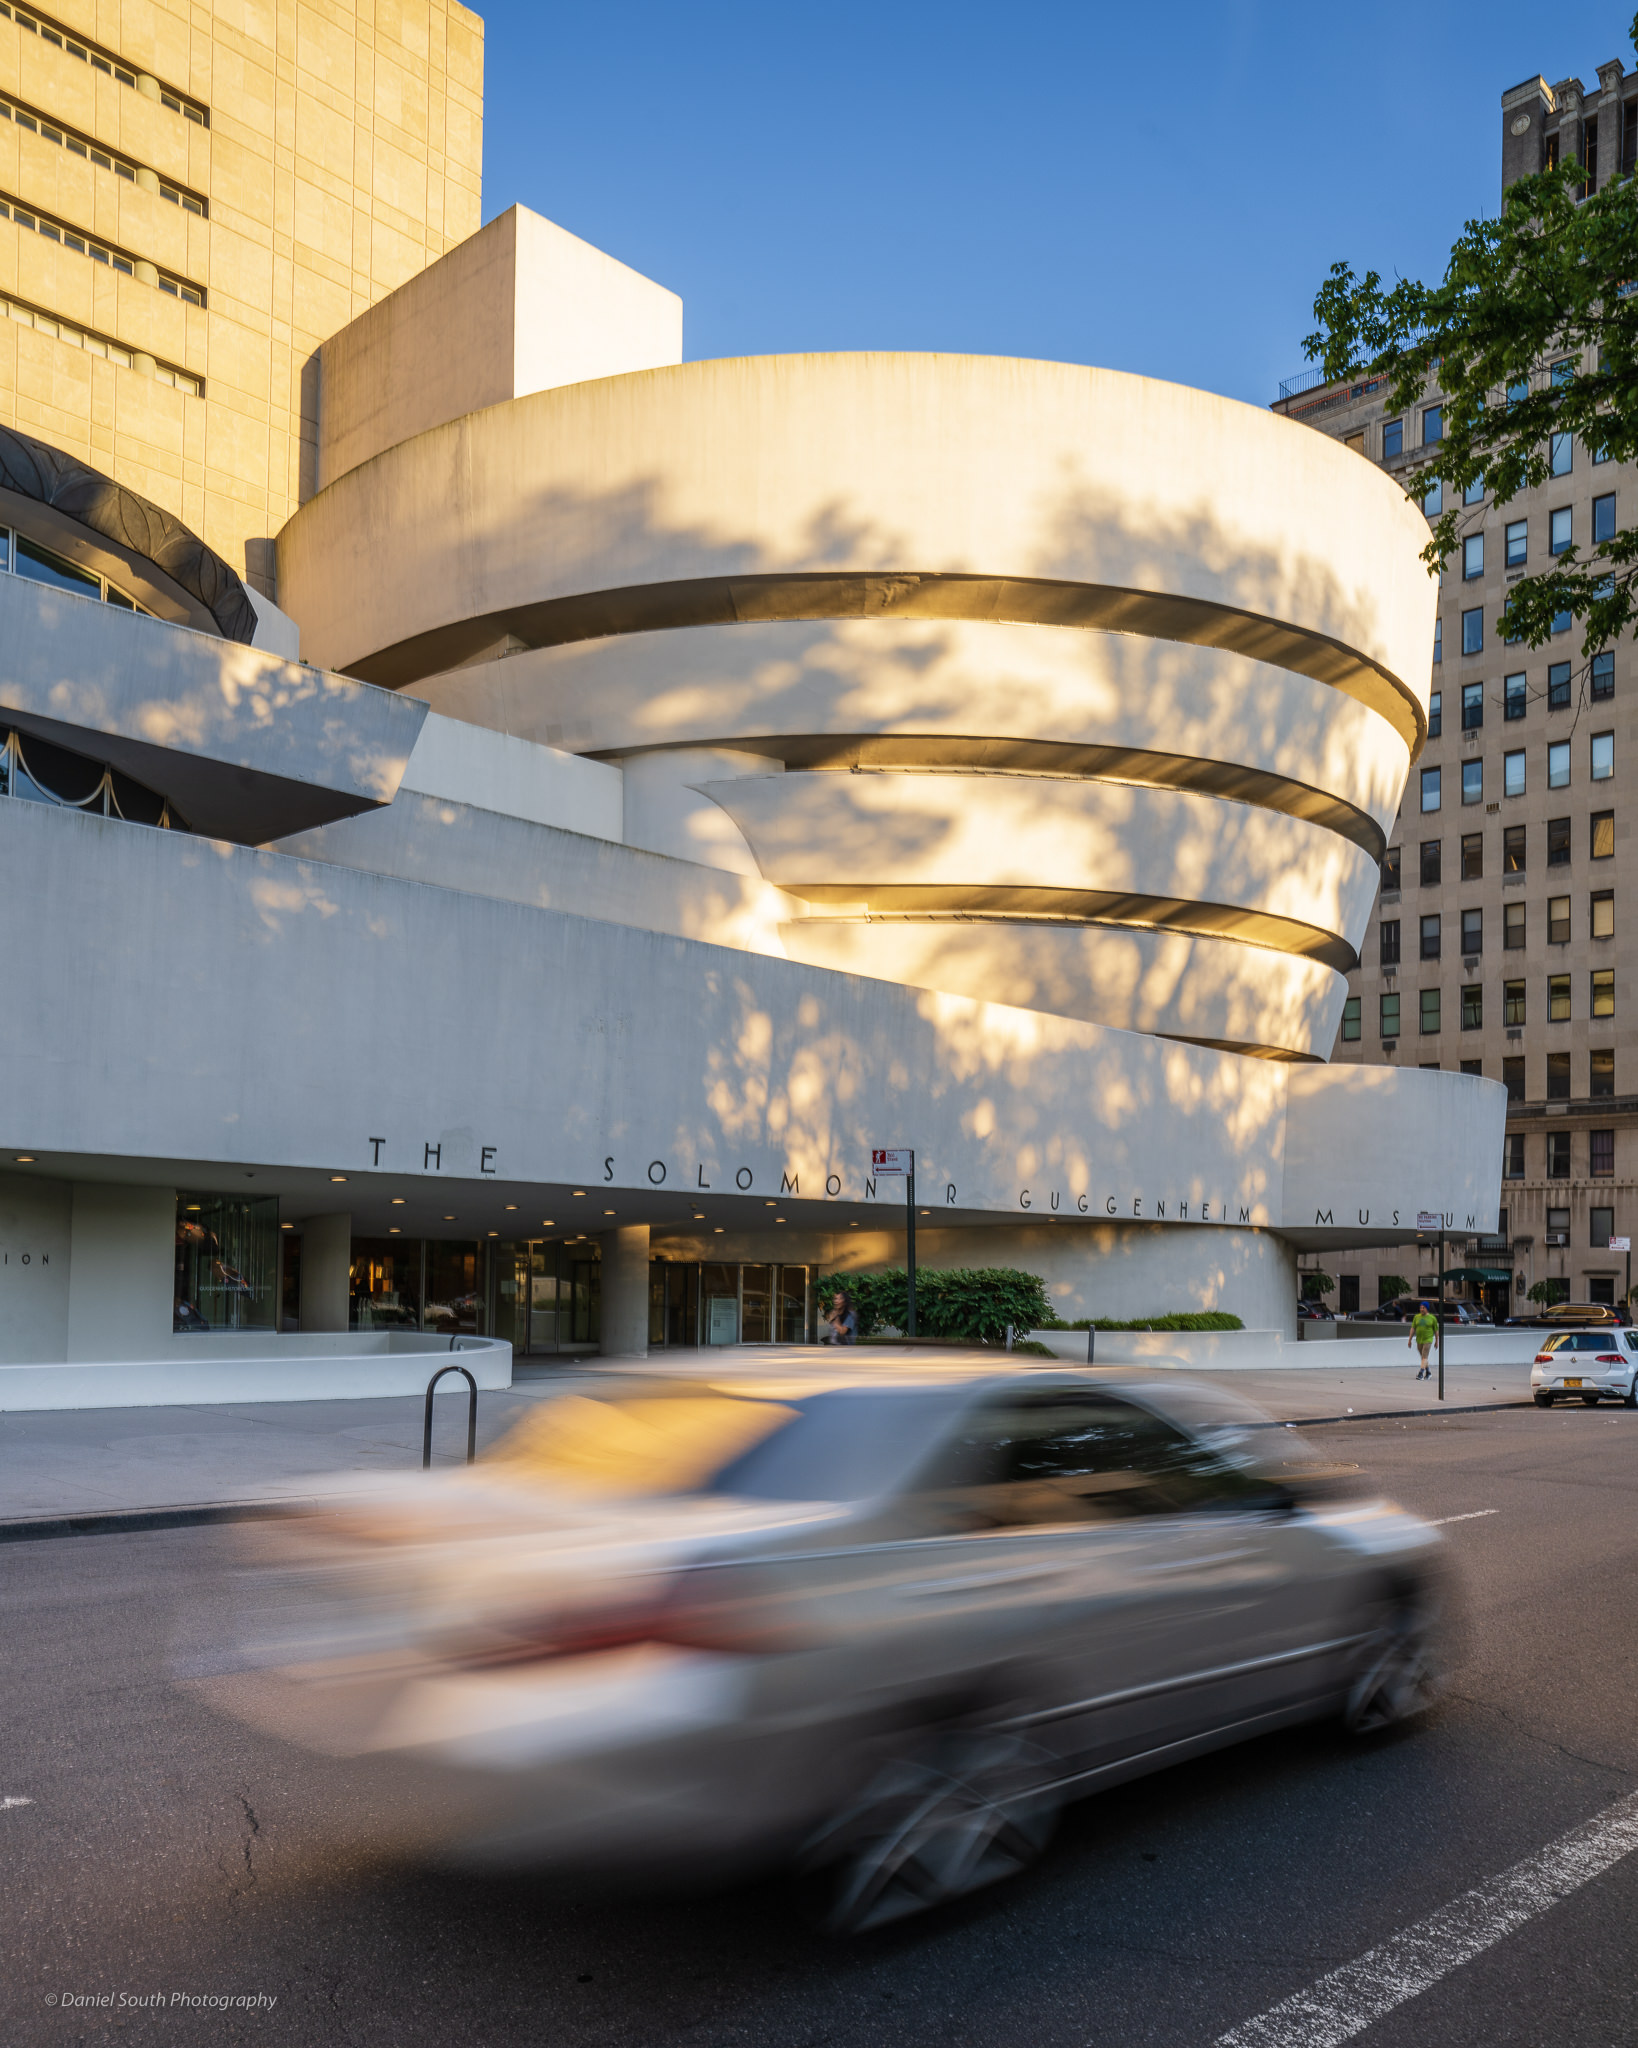 a photo of the guggenheim museum in new york with a speeding car